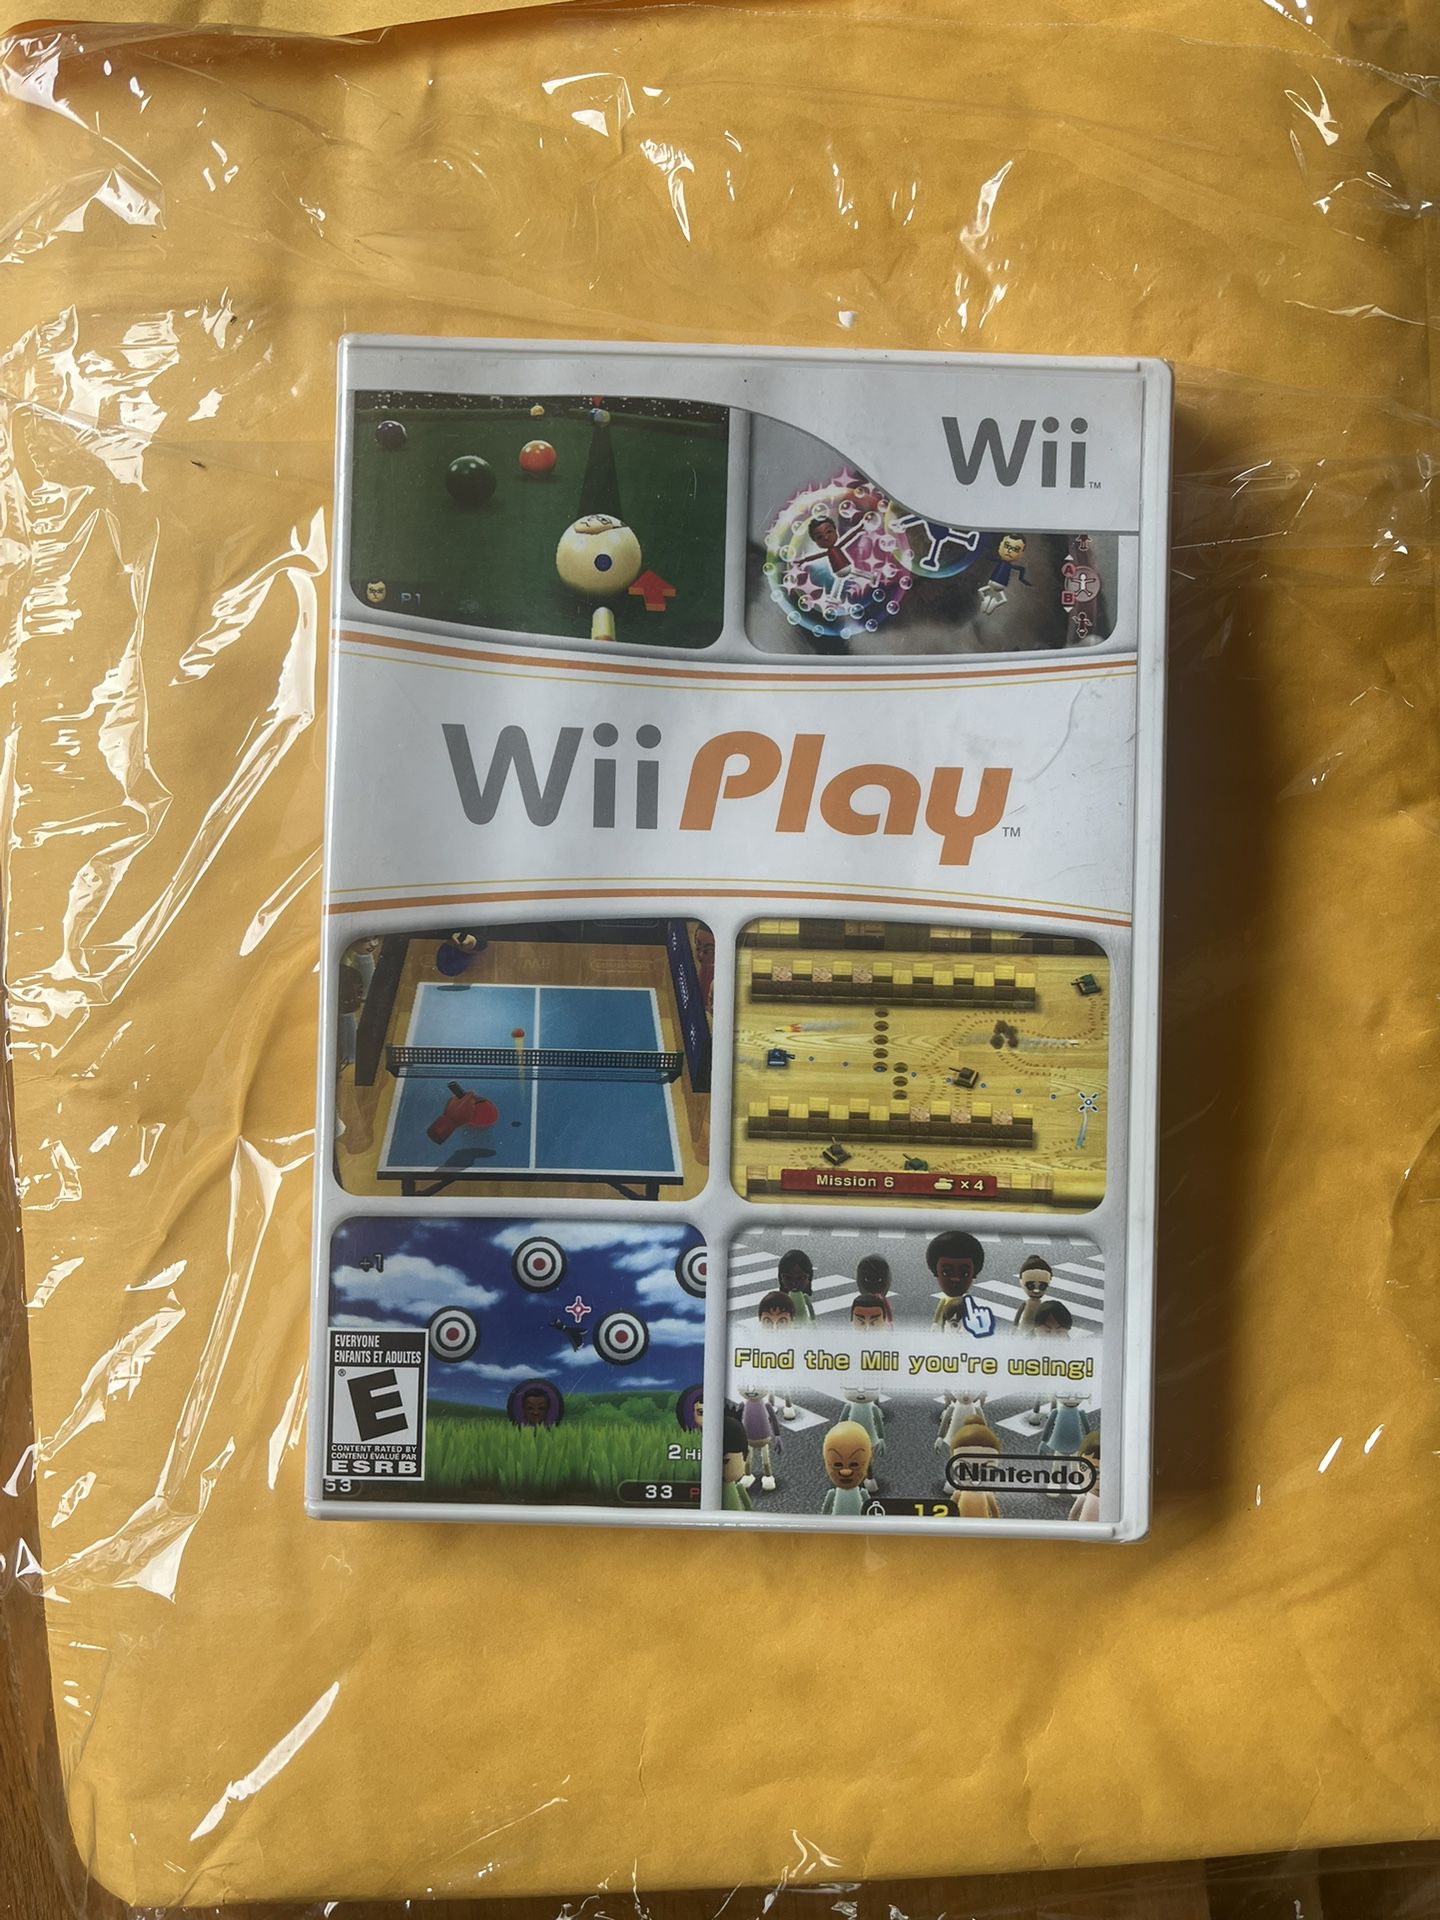 Wii Play Video Game